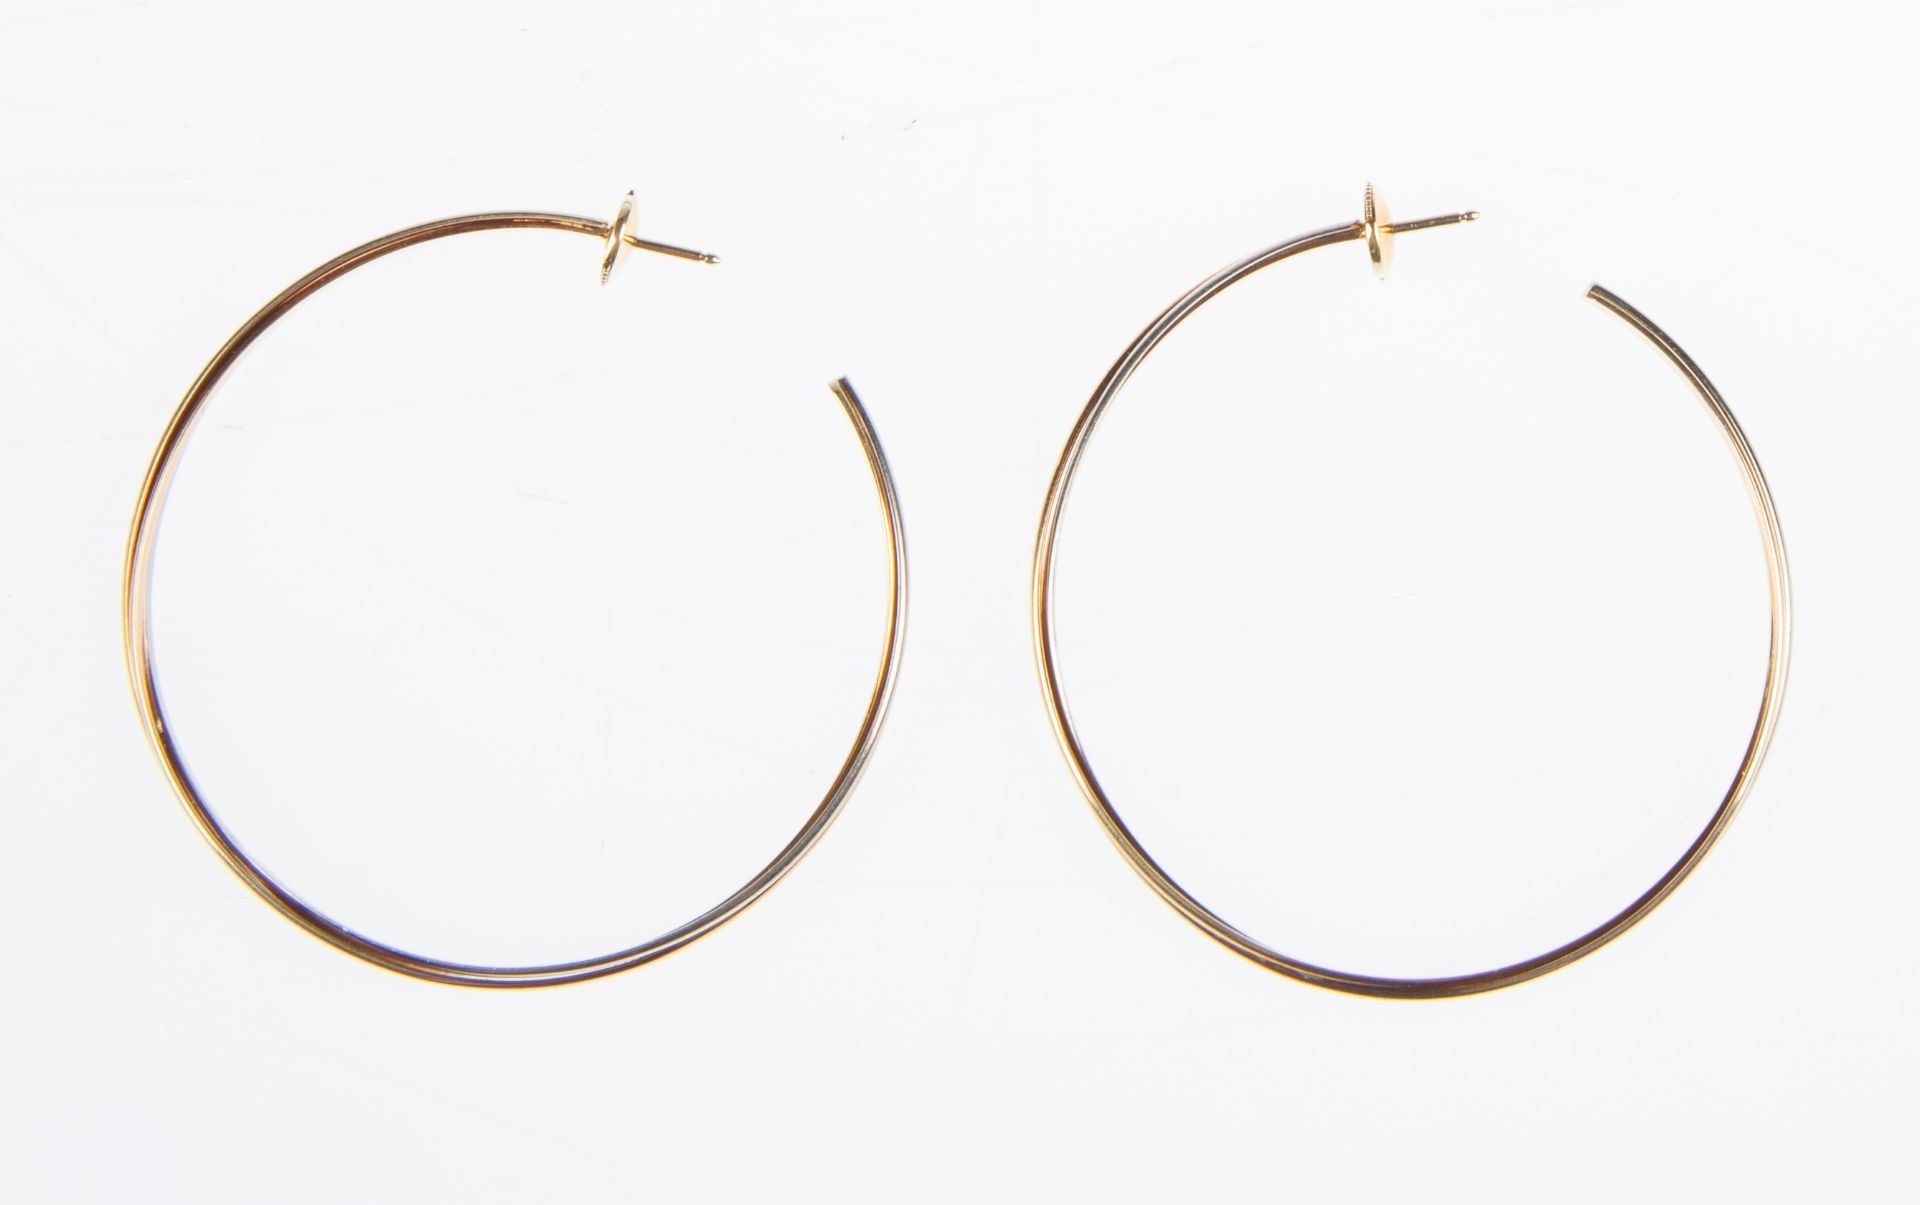 A PAIR OF CONTEMPORARY CARTIER 18K GOLD 'TRINITY' HOOP EARRINGS - Image 2 of 3